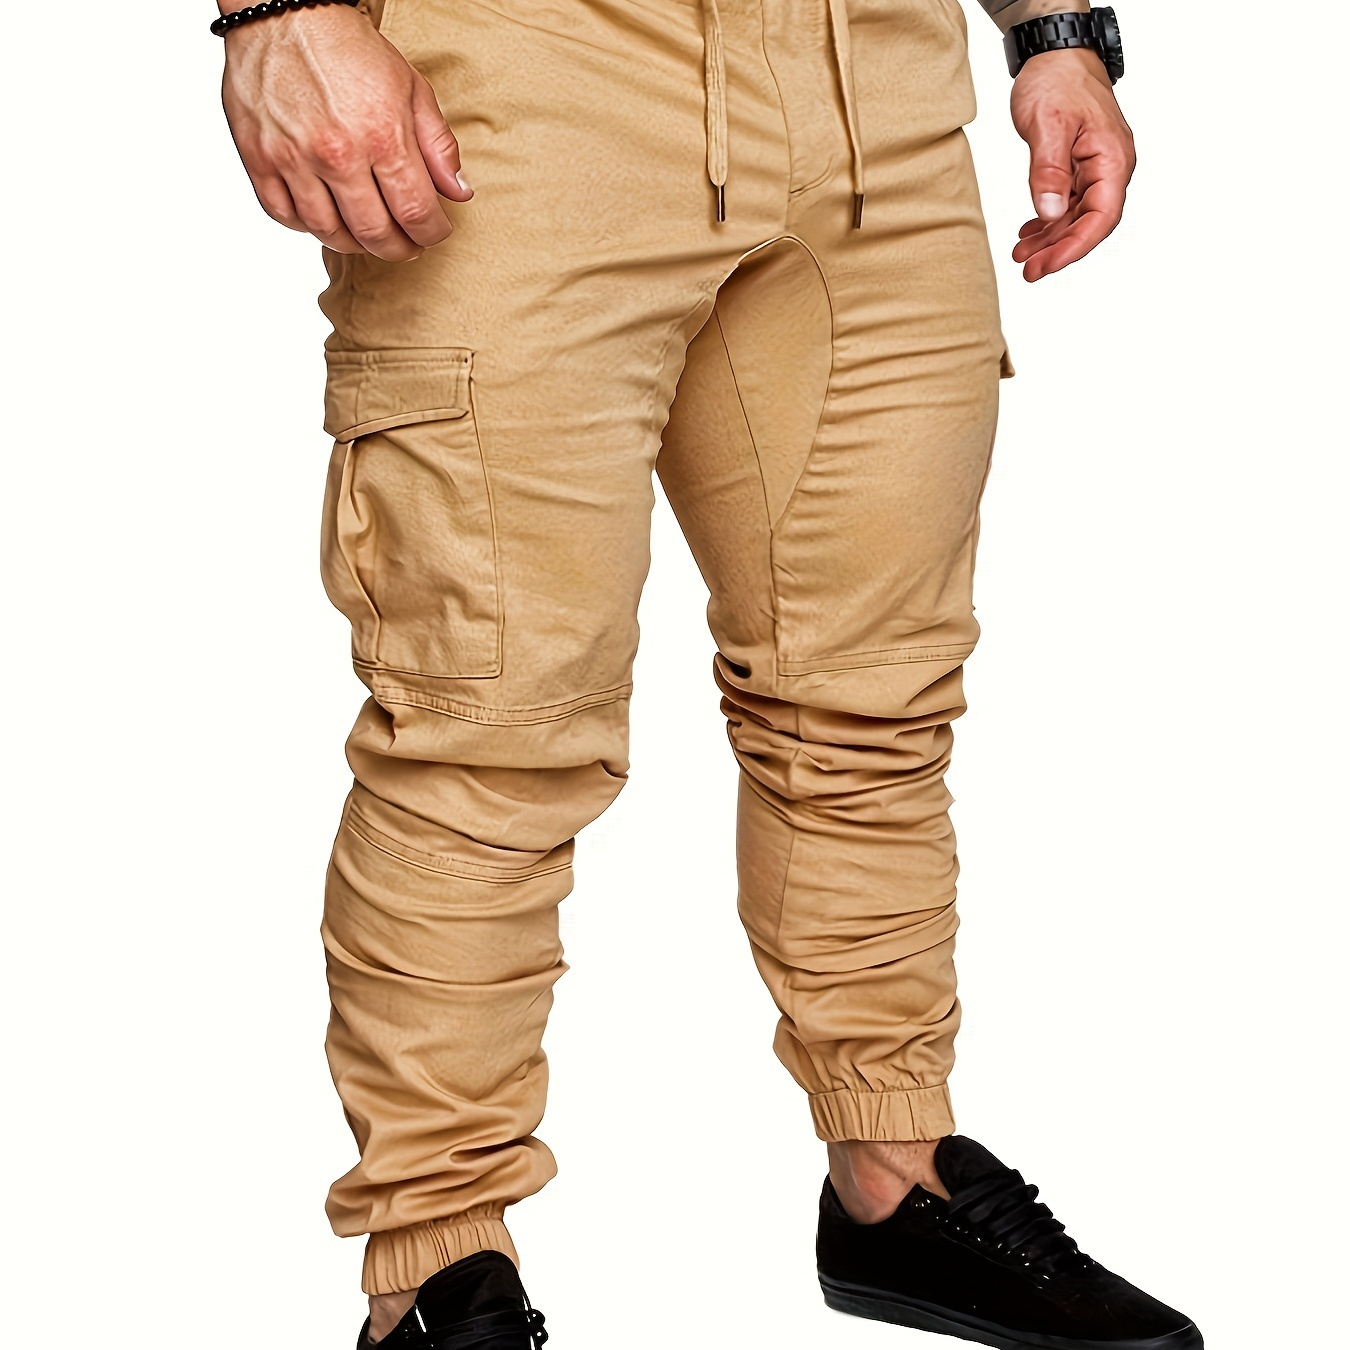 

Men's Regular Fit And Cuffed Cotton Cargo Pants With Flap Pockets And Elastic Waistband, Durable Bottoms For All- Activities